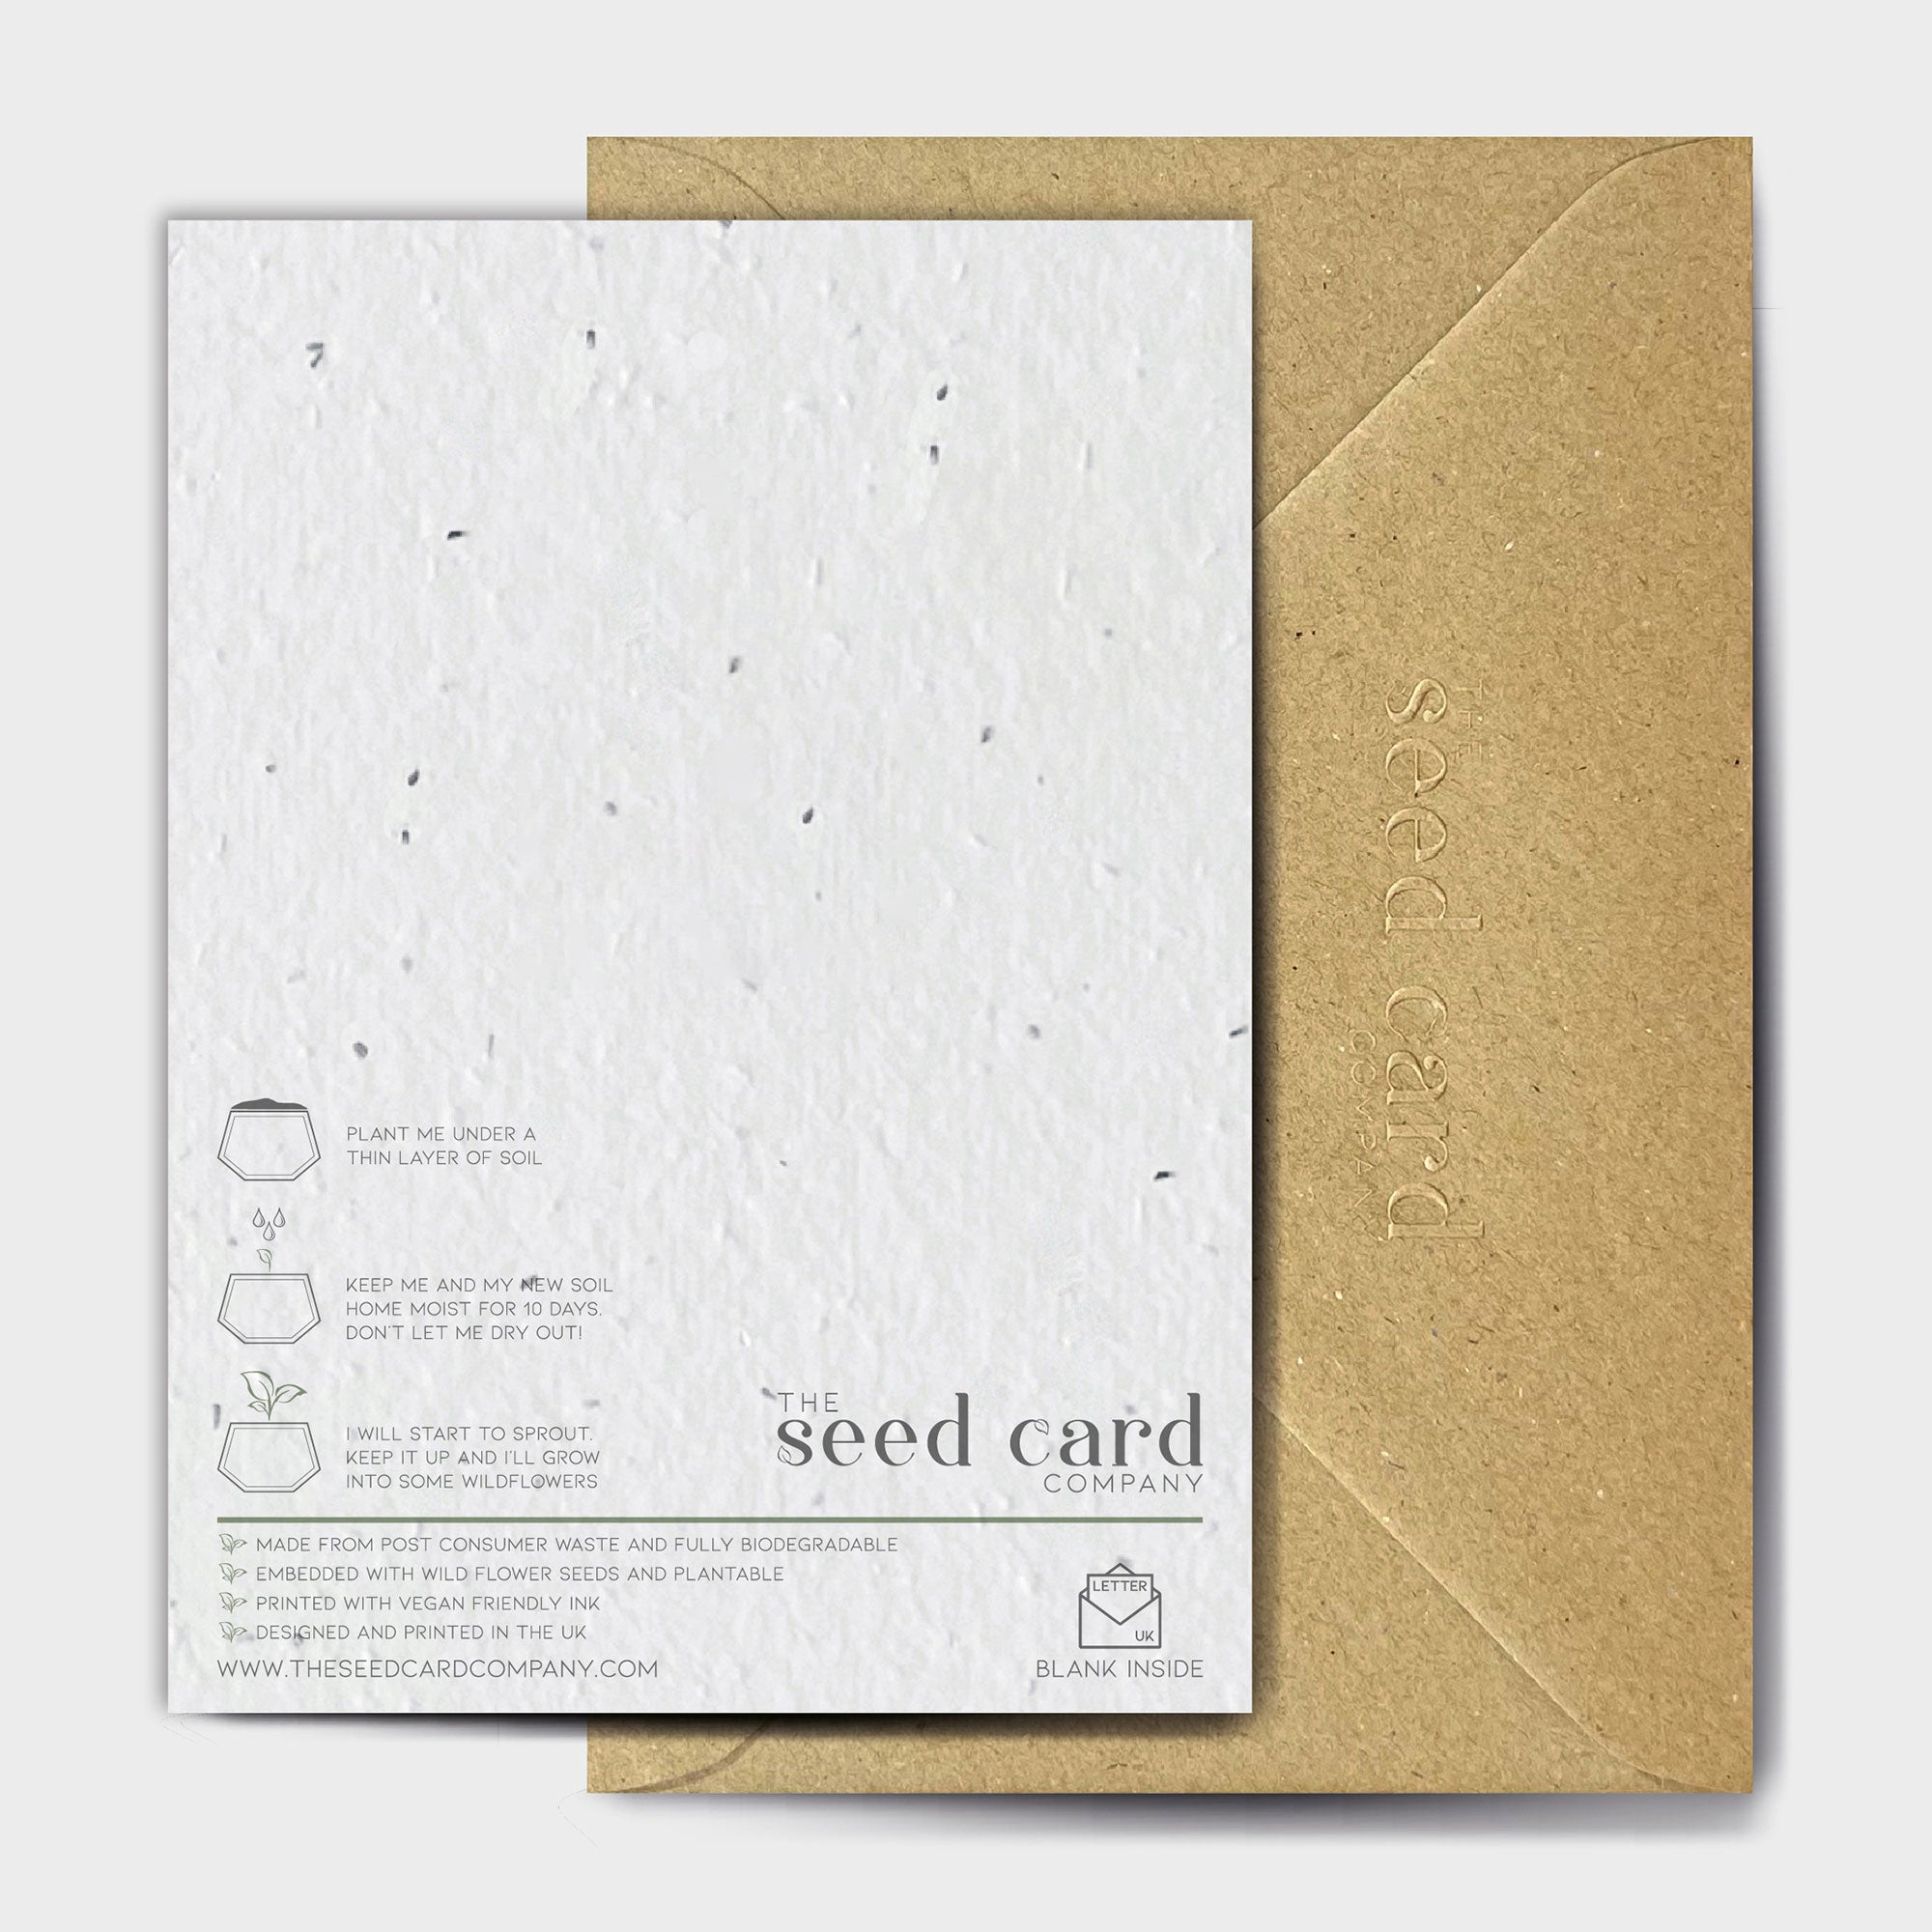 Shop online Violet Variations - 100% biodegradable seed-embedded cards Shop -The Seed Card Company